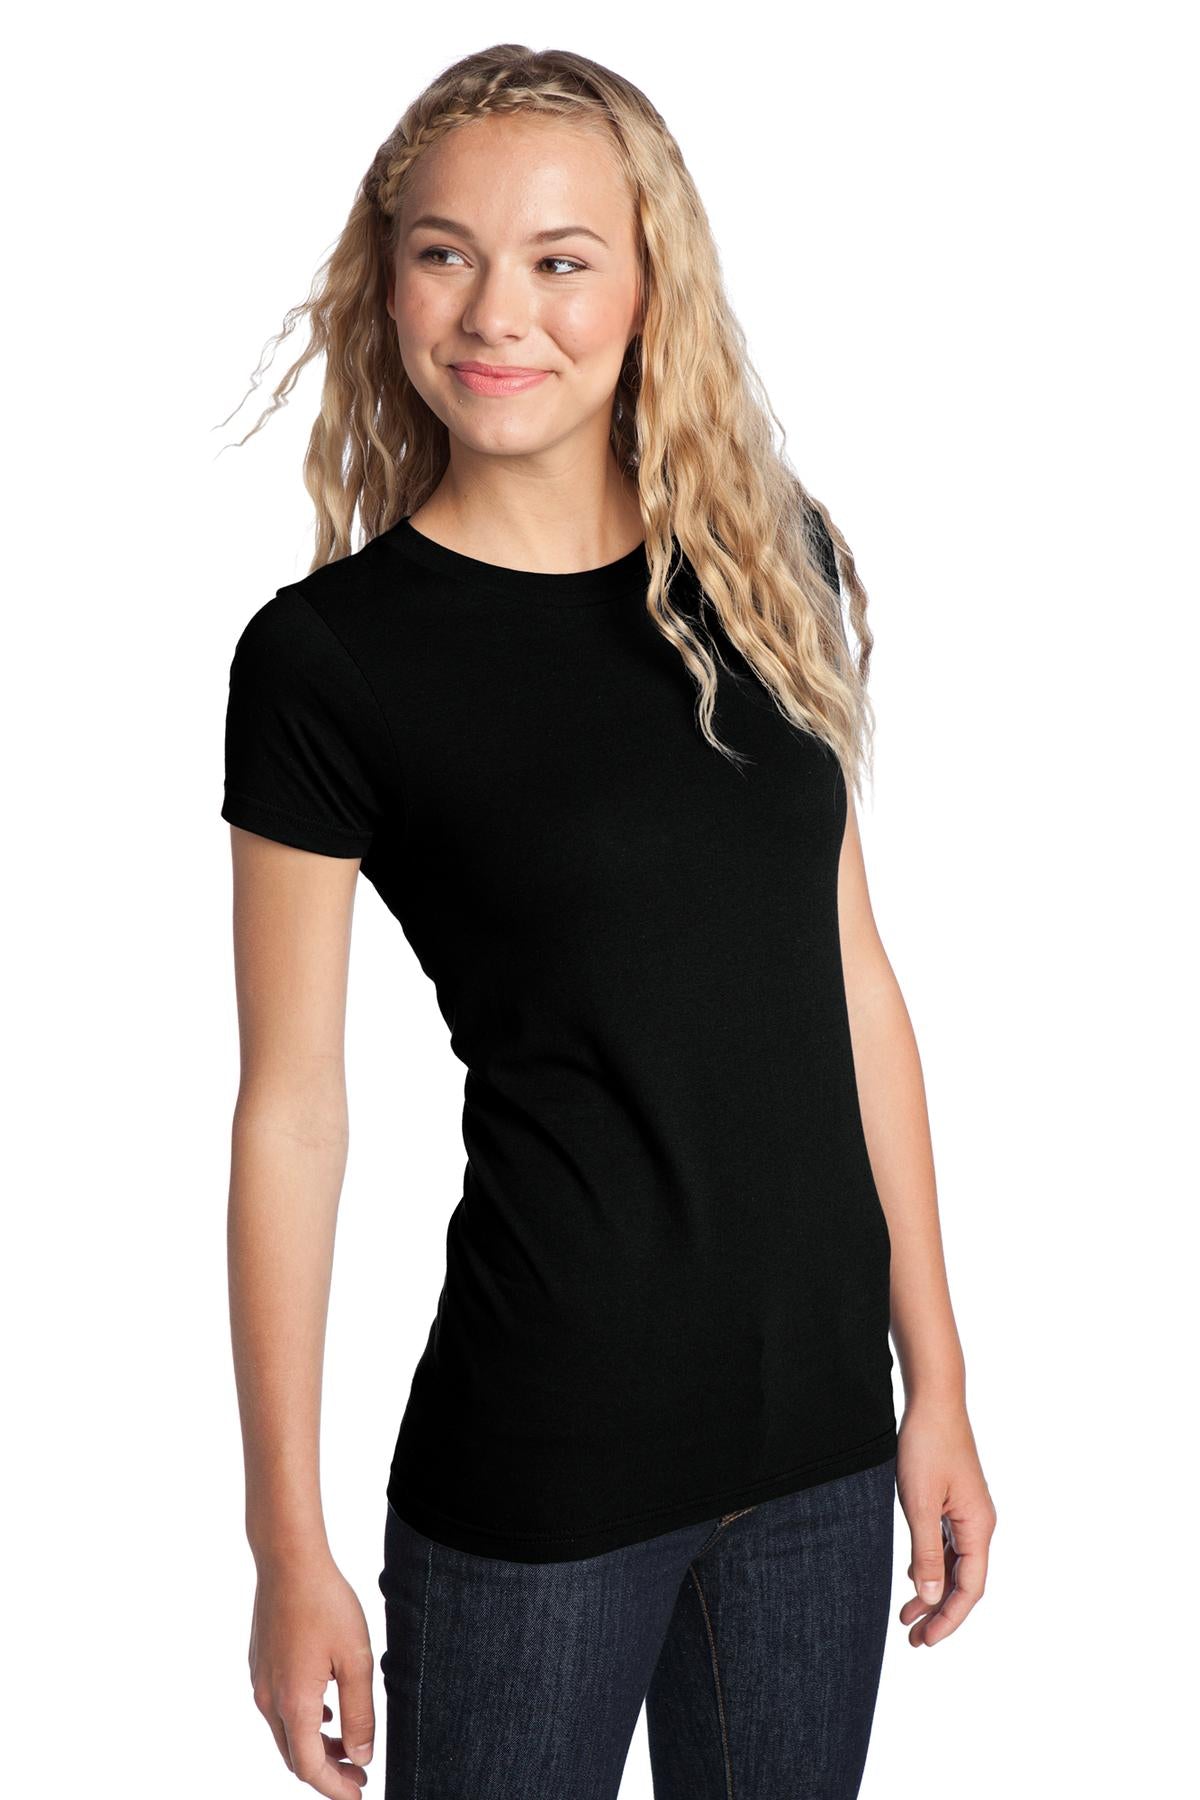 District Women's Fitted The Concert Tee DT5001 - Black